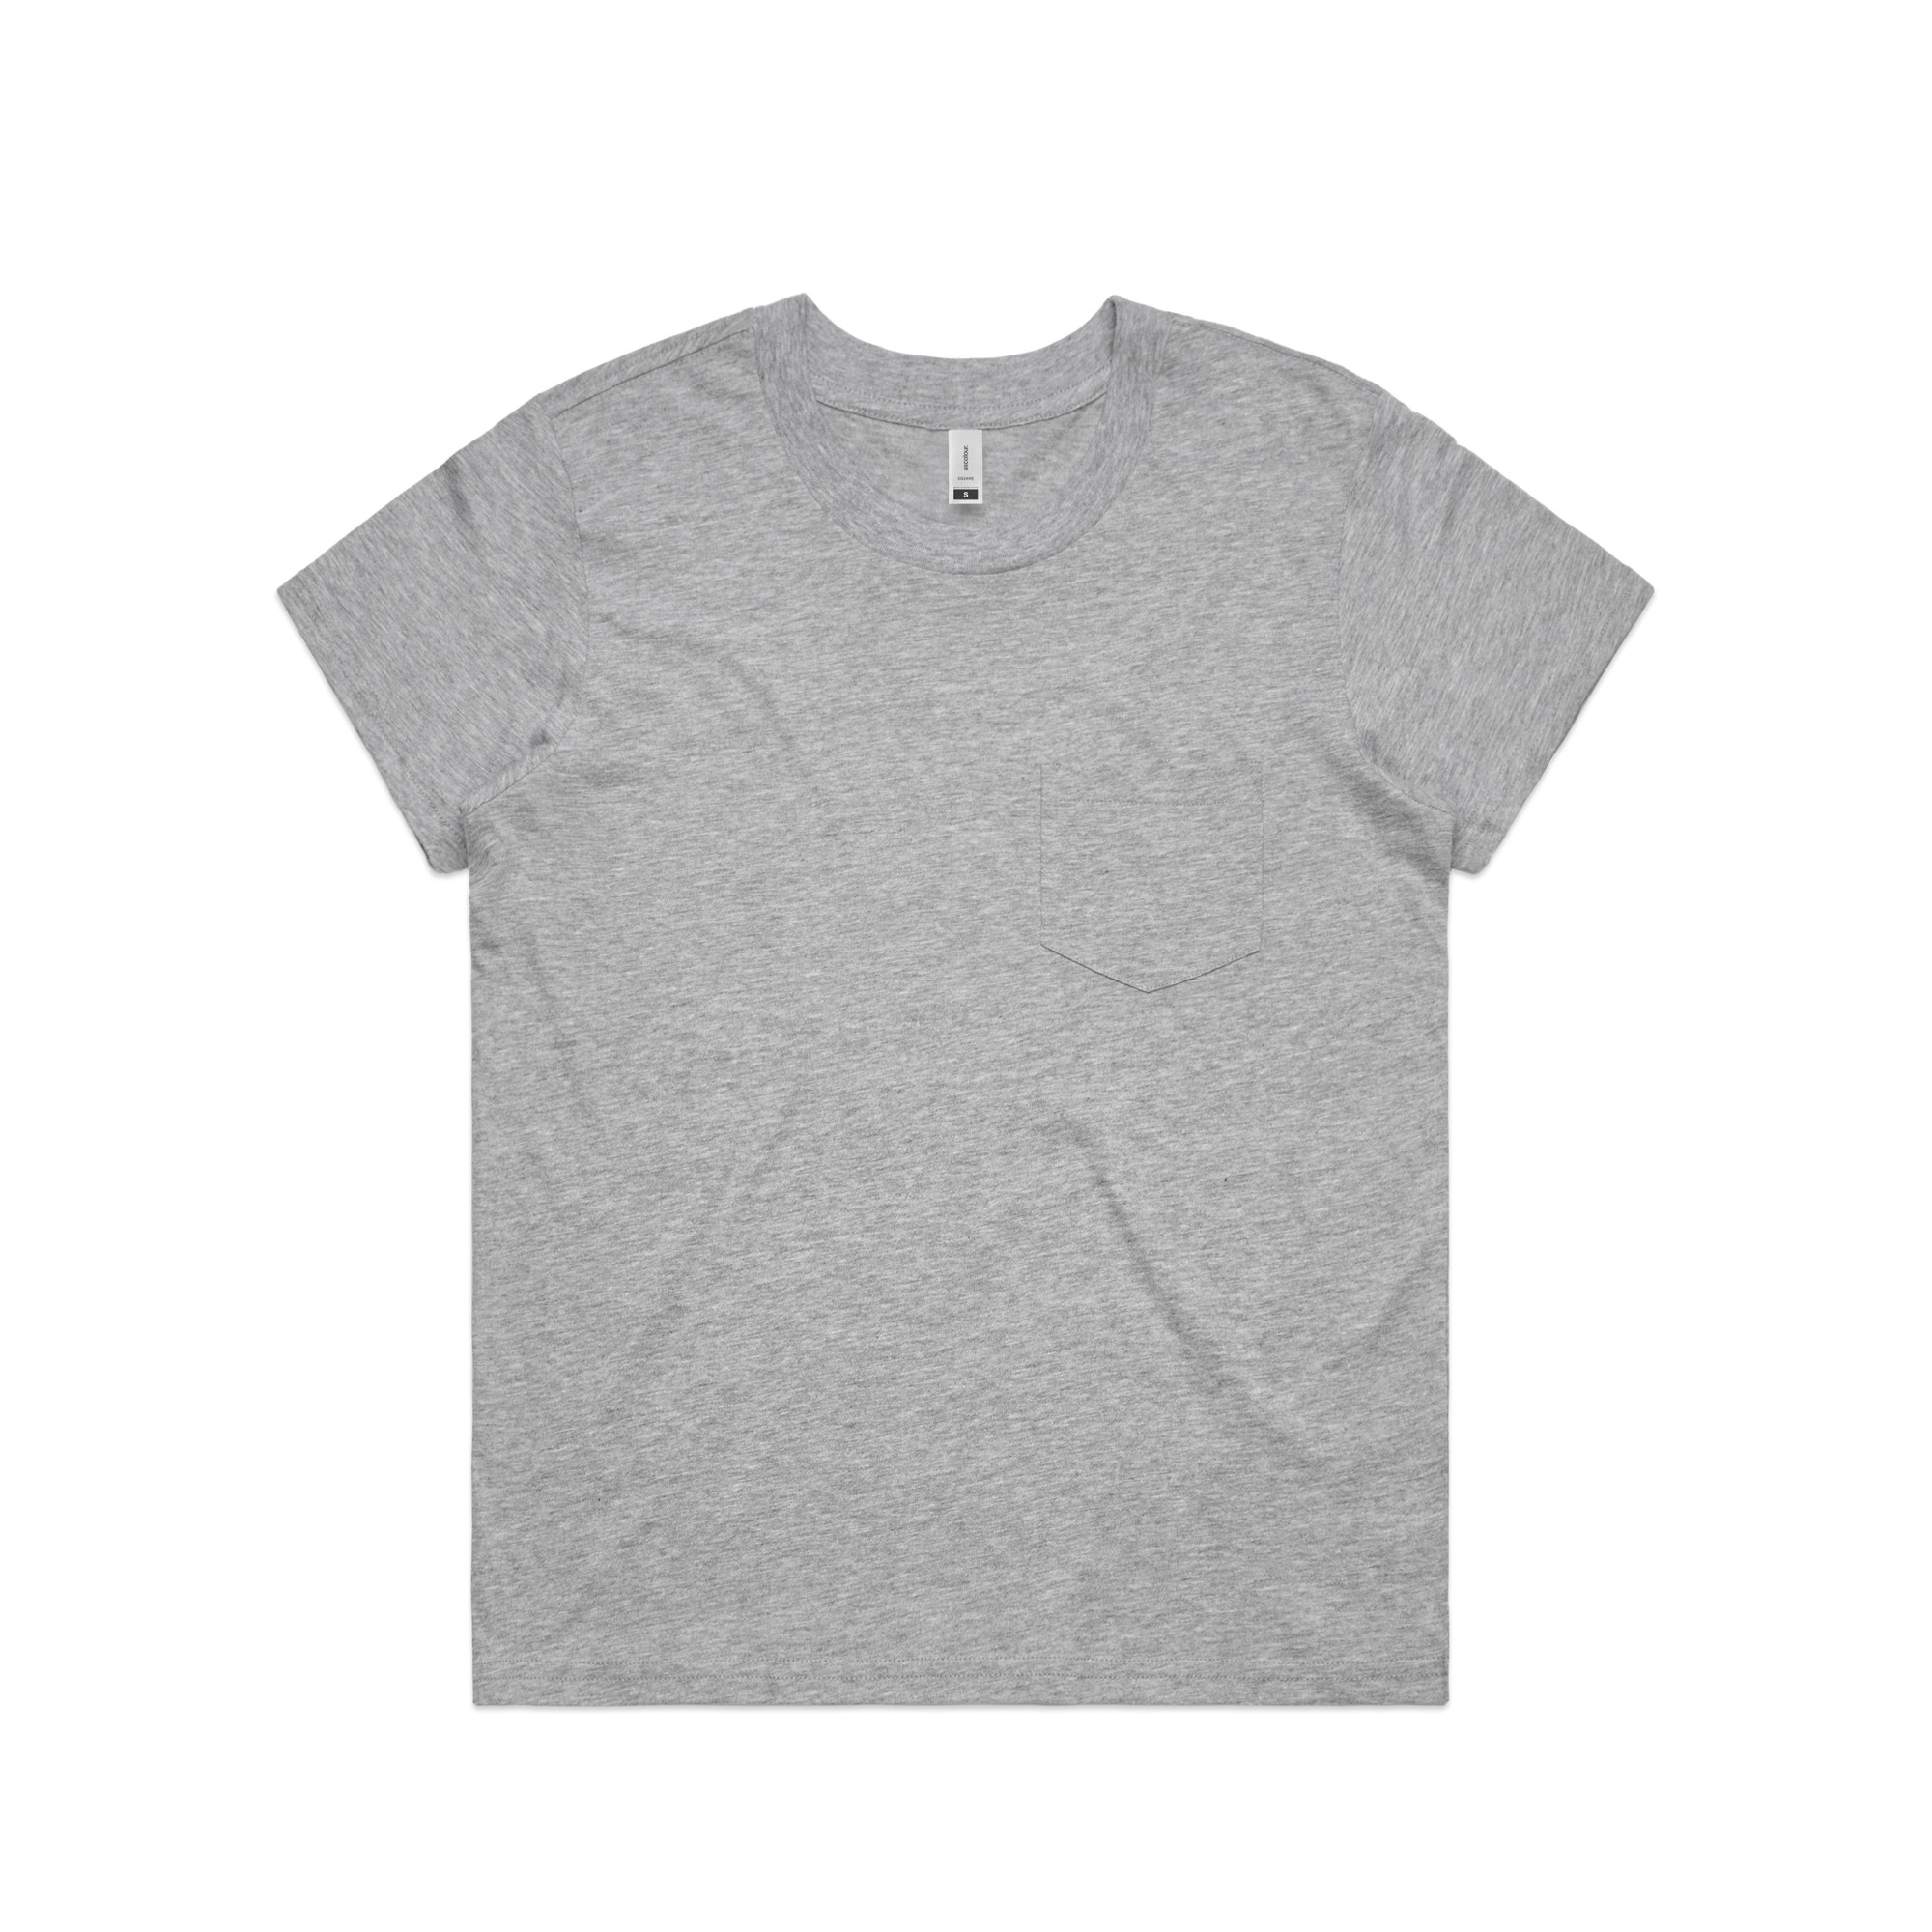 Wo's Square Pocket Tee | 4046 - AS Colour NZ